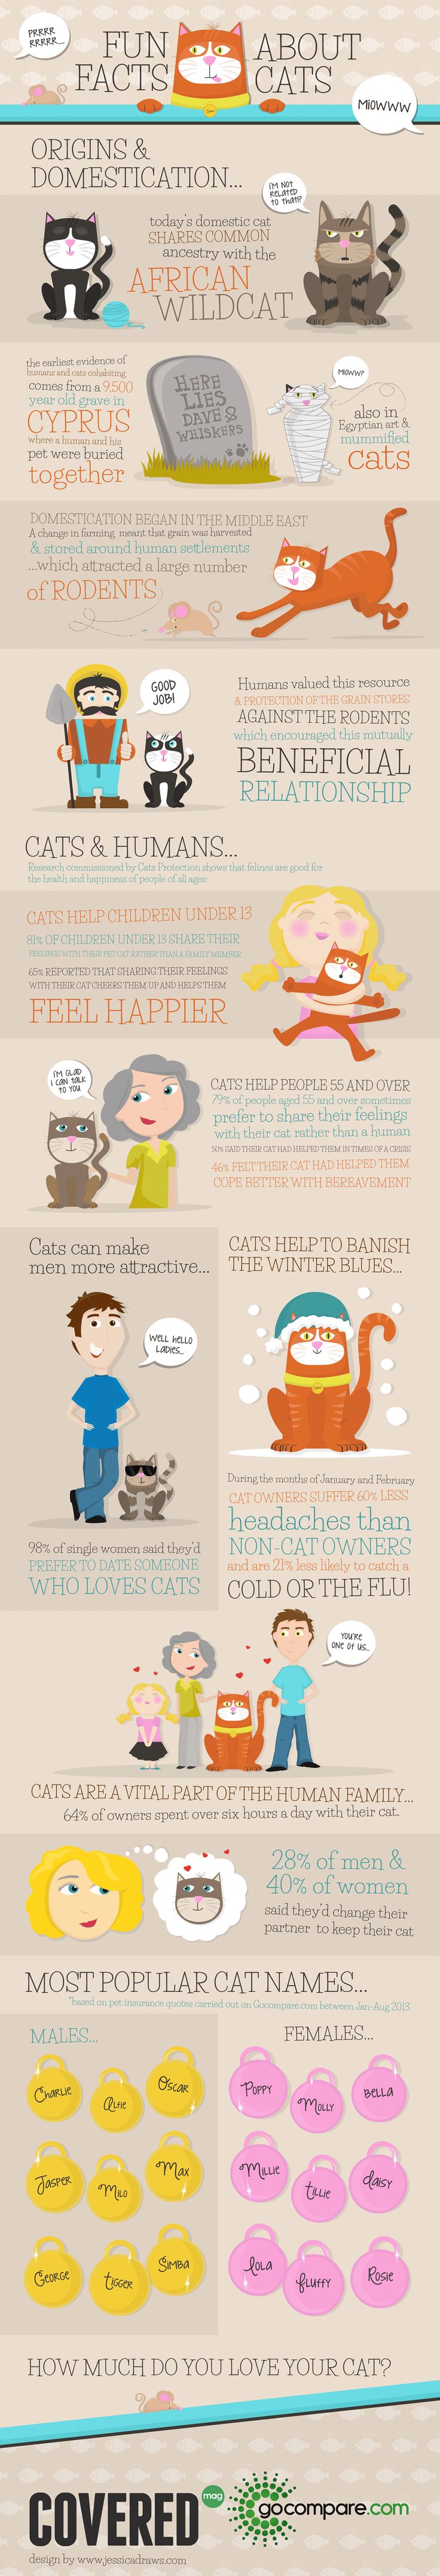 infographic about cat facts